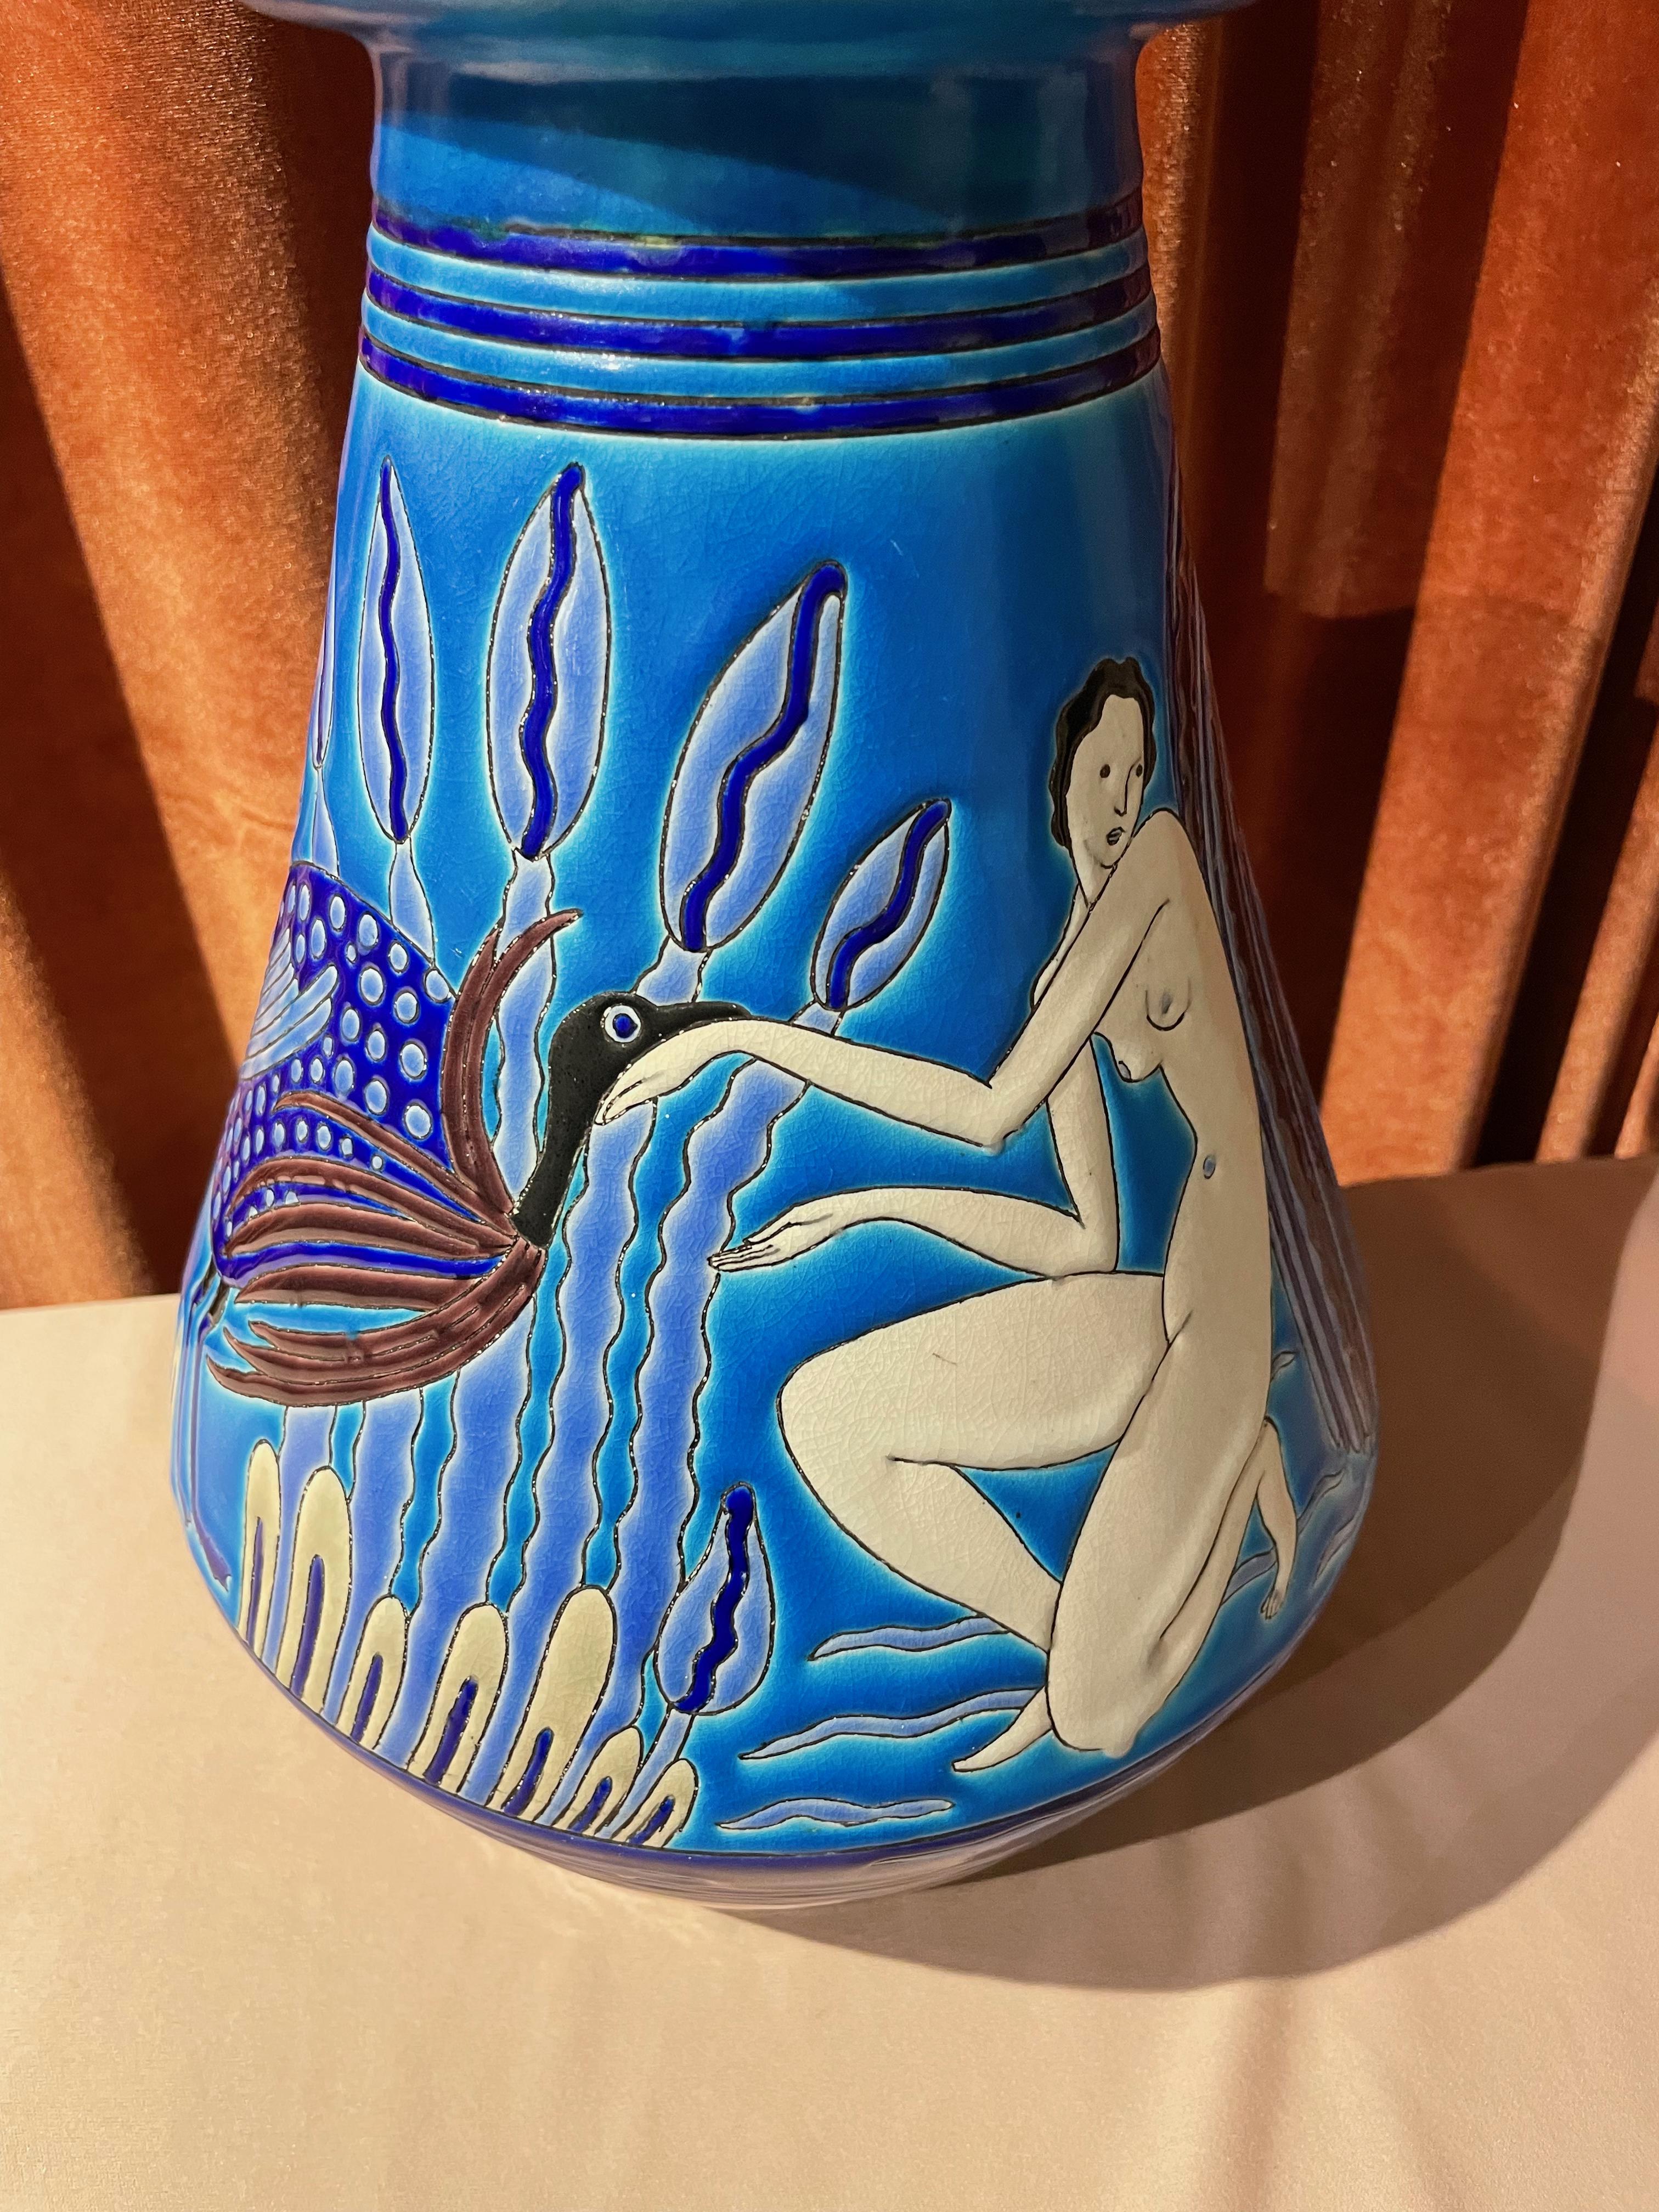 “Aux Baigneuses” is a fine Longwy Primavera Art Deco ceramic vase with 2 bathing nudes, a peacock, and ibex in blue, purple, black, and white shades. Longwy made this French Art Deco vase for Atelier Primavera, the design studio of the Paris